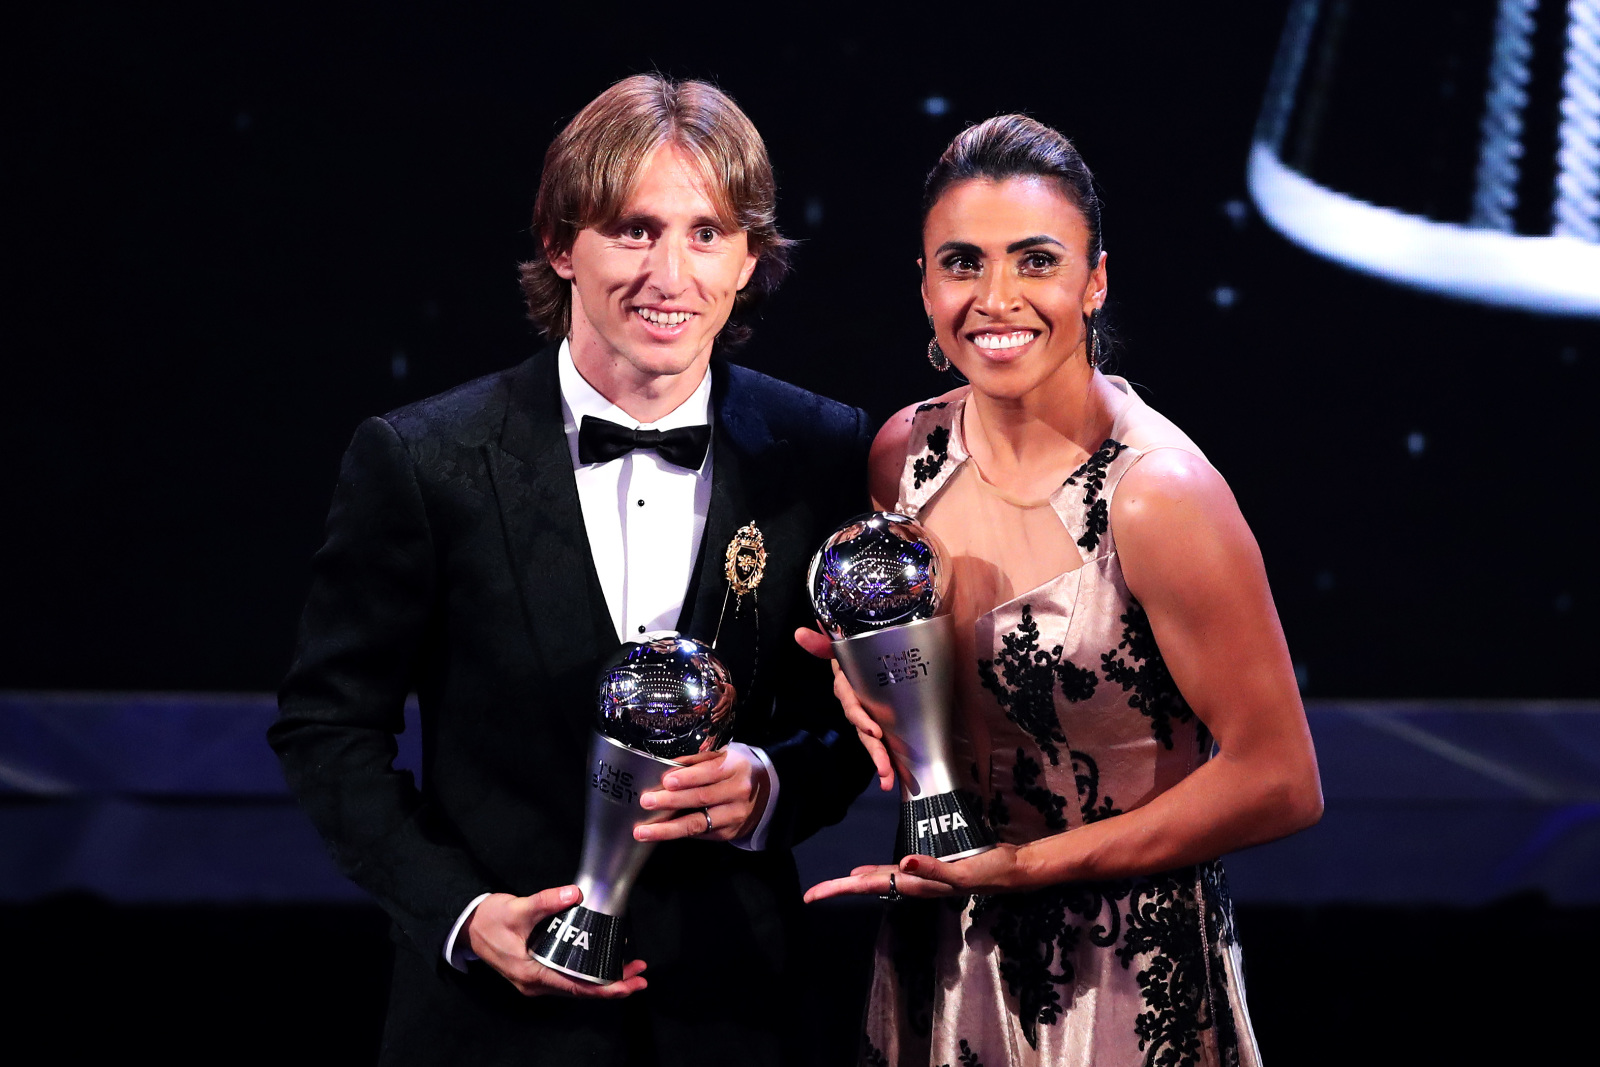 The Ballon d'Or has become a meaningless accolade thanks to stupid